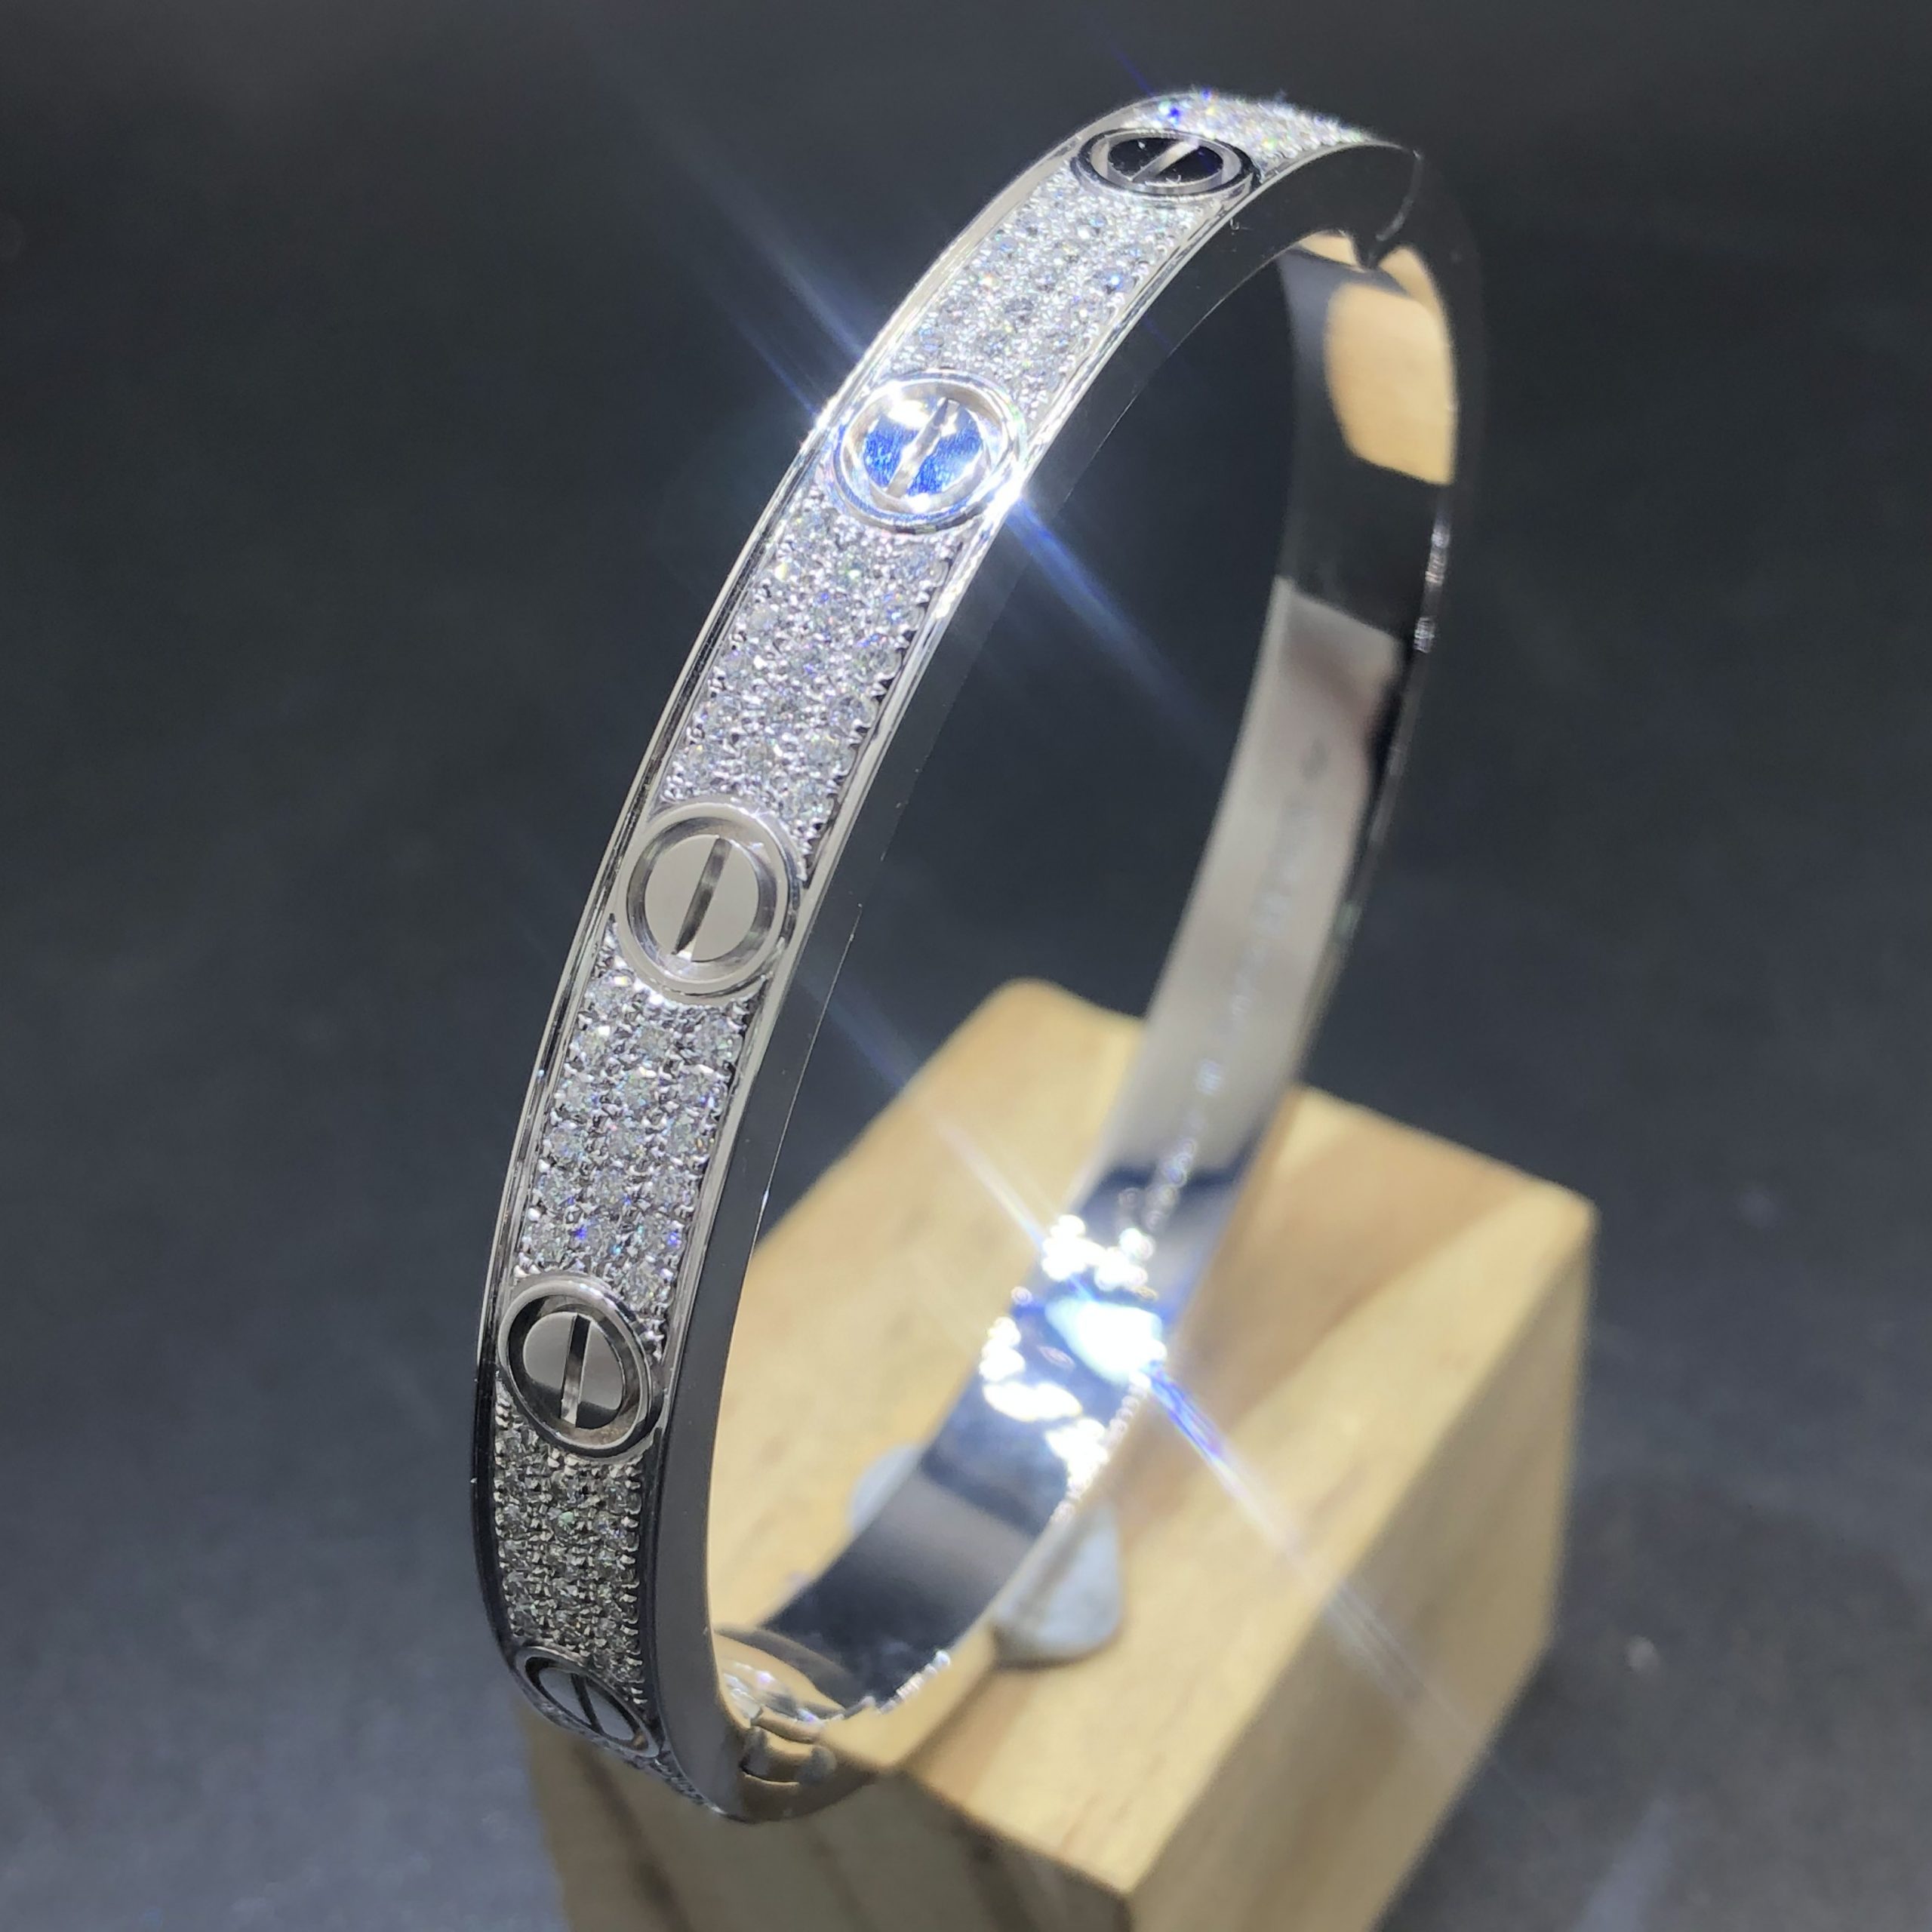 Cartier Love Bracelet Custom in Solid 18K White Gold with 204 Diamonds-paved